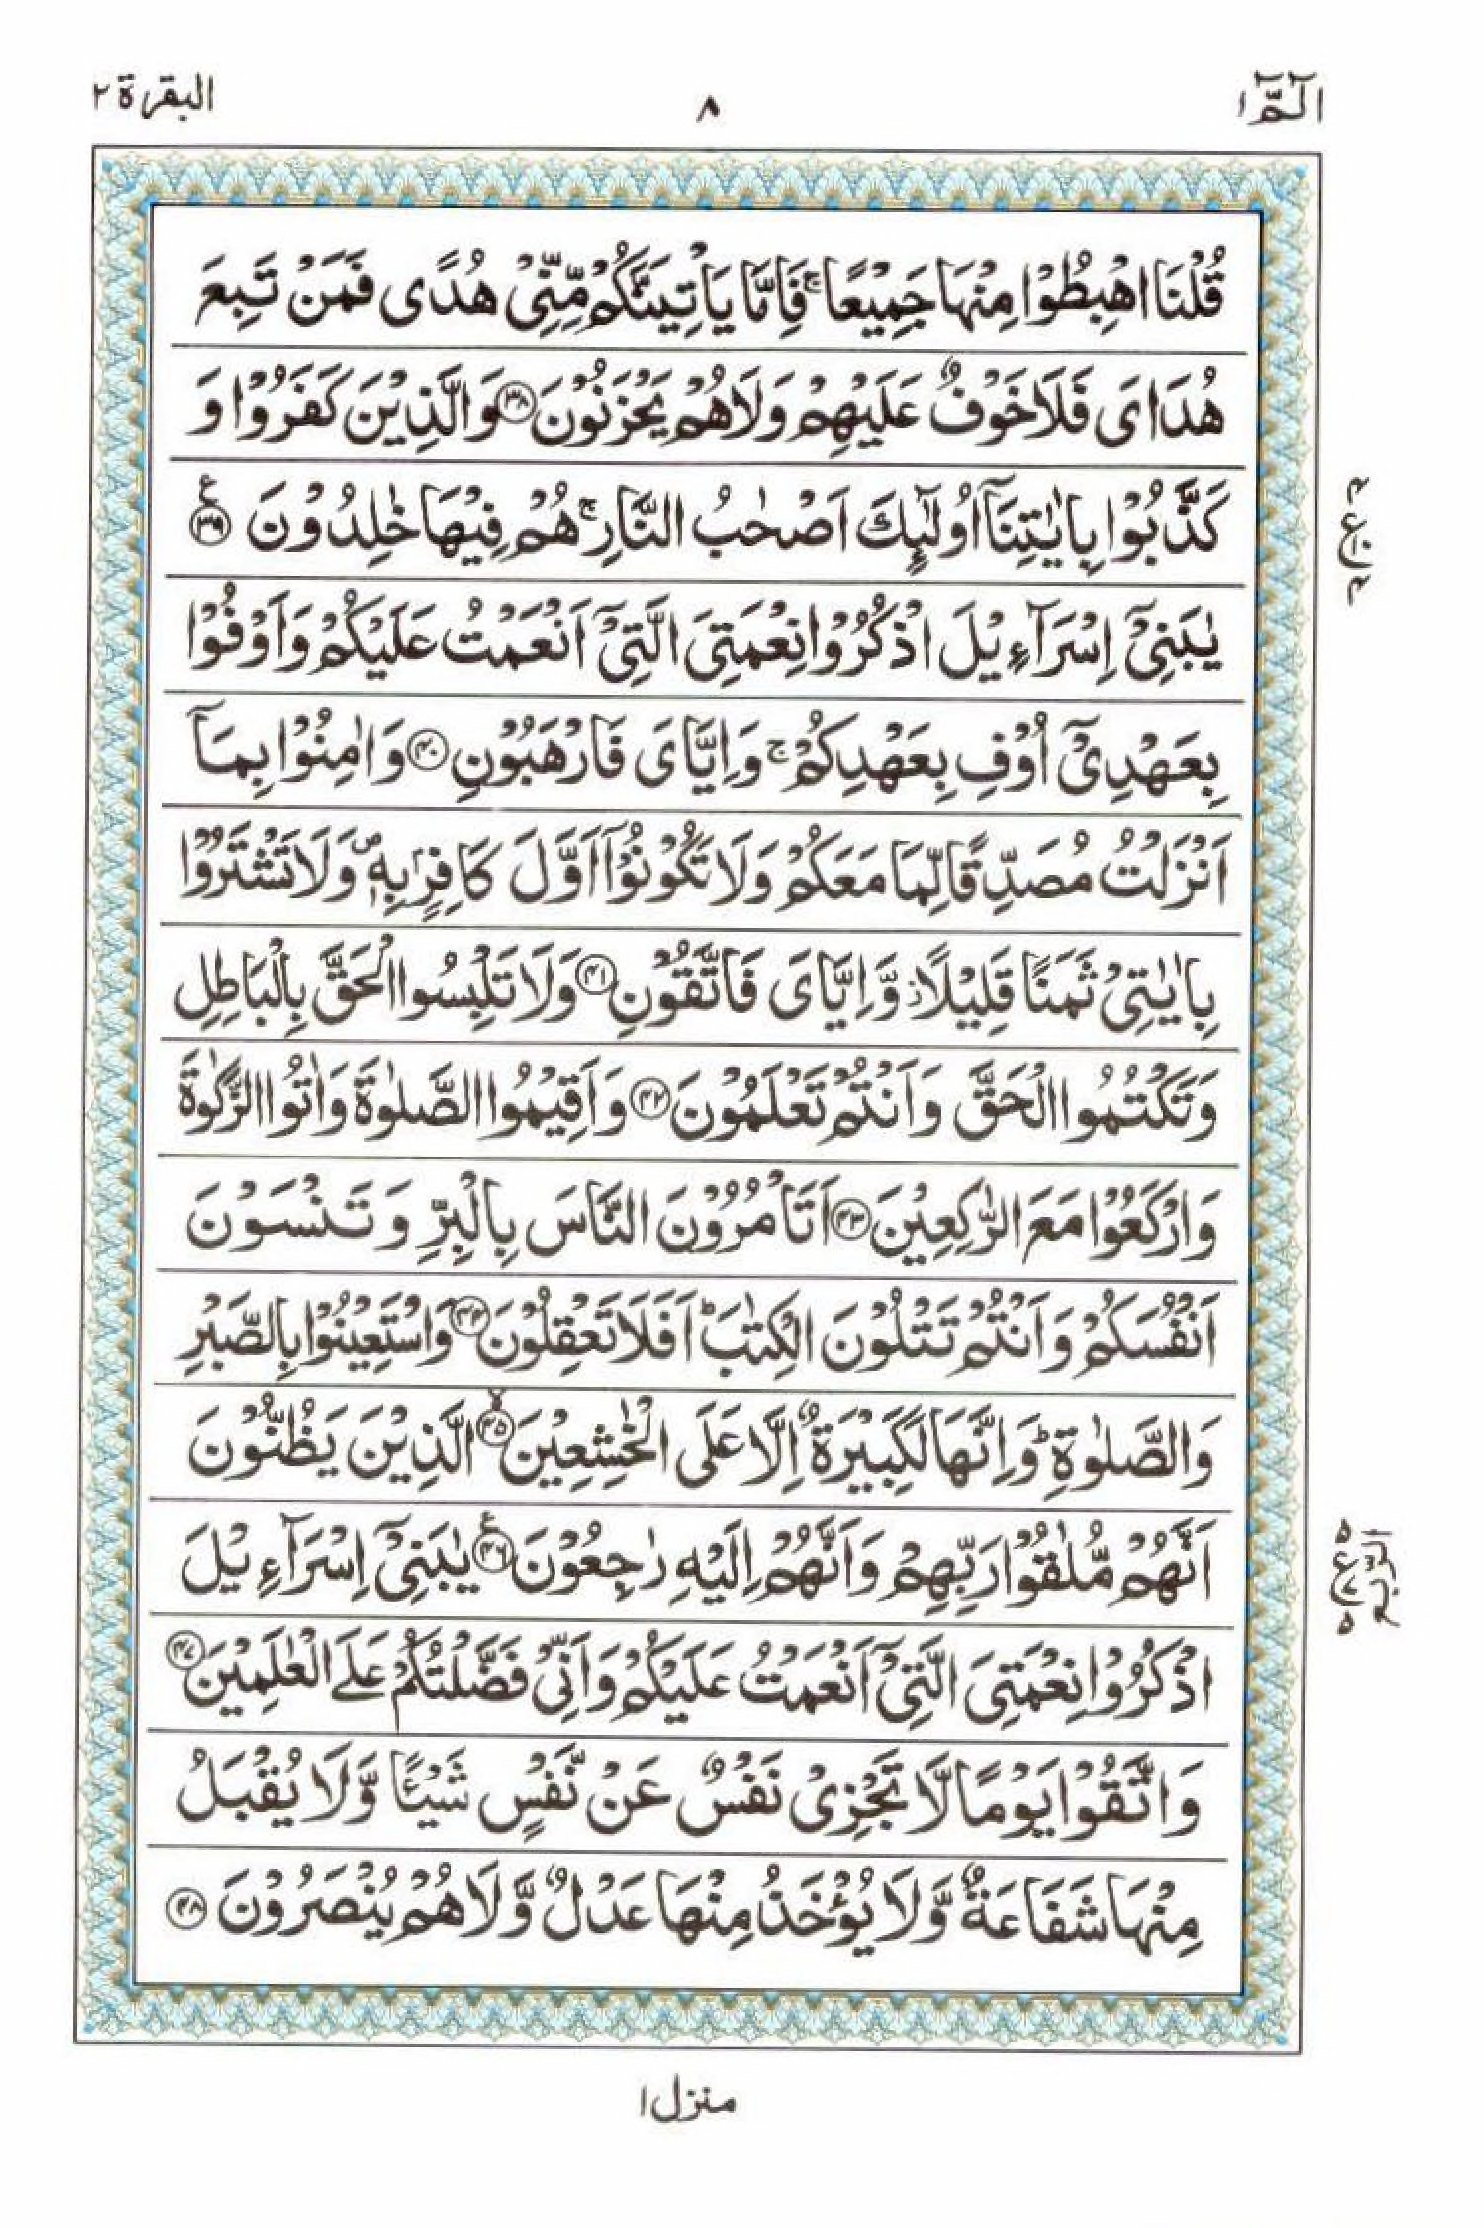 Read 15 Lines Quran, Part / Chapter / Siparah 1 Page 8